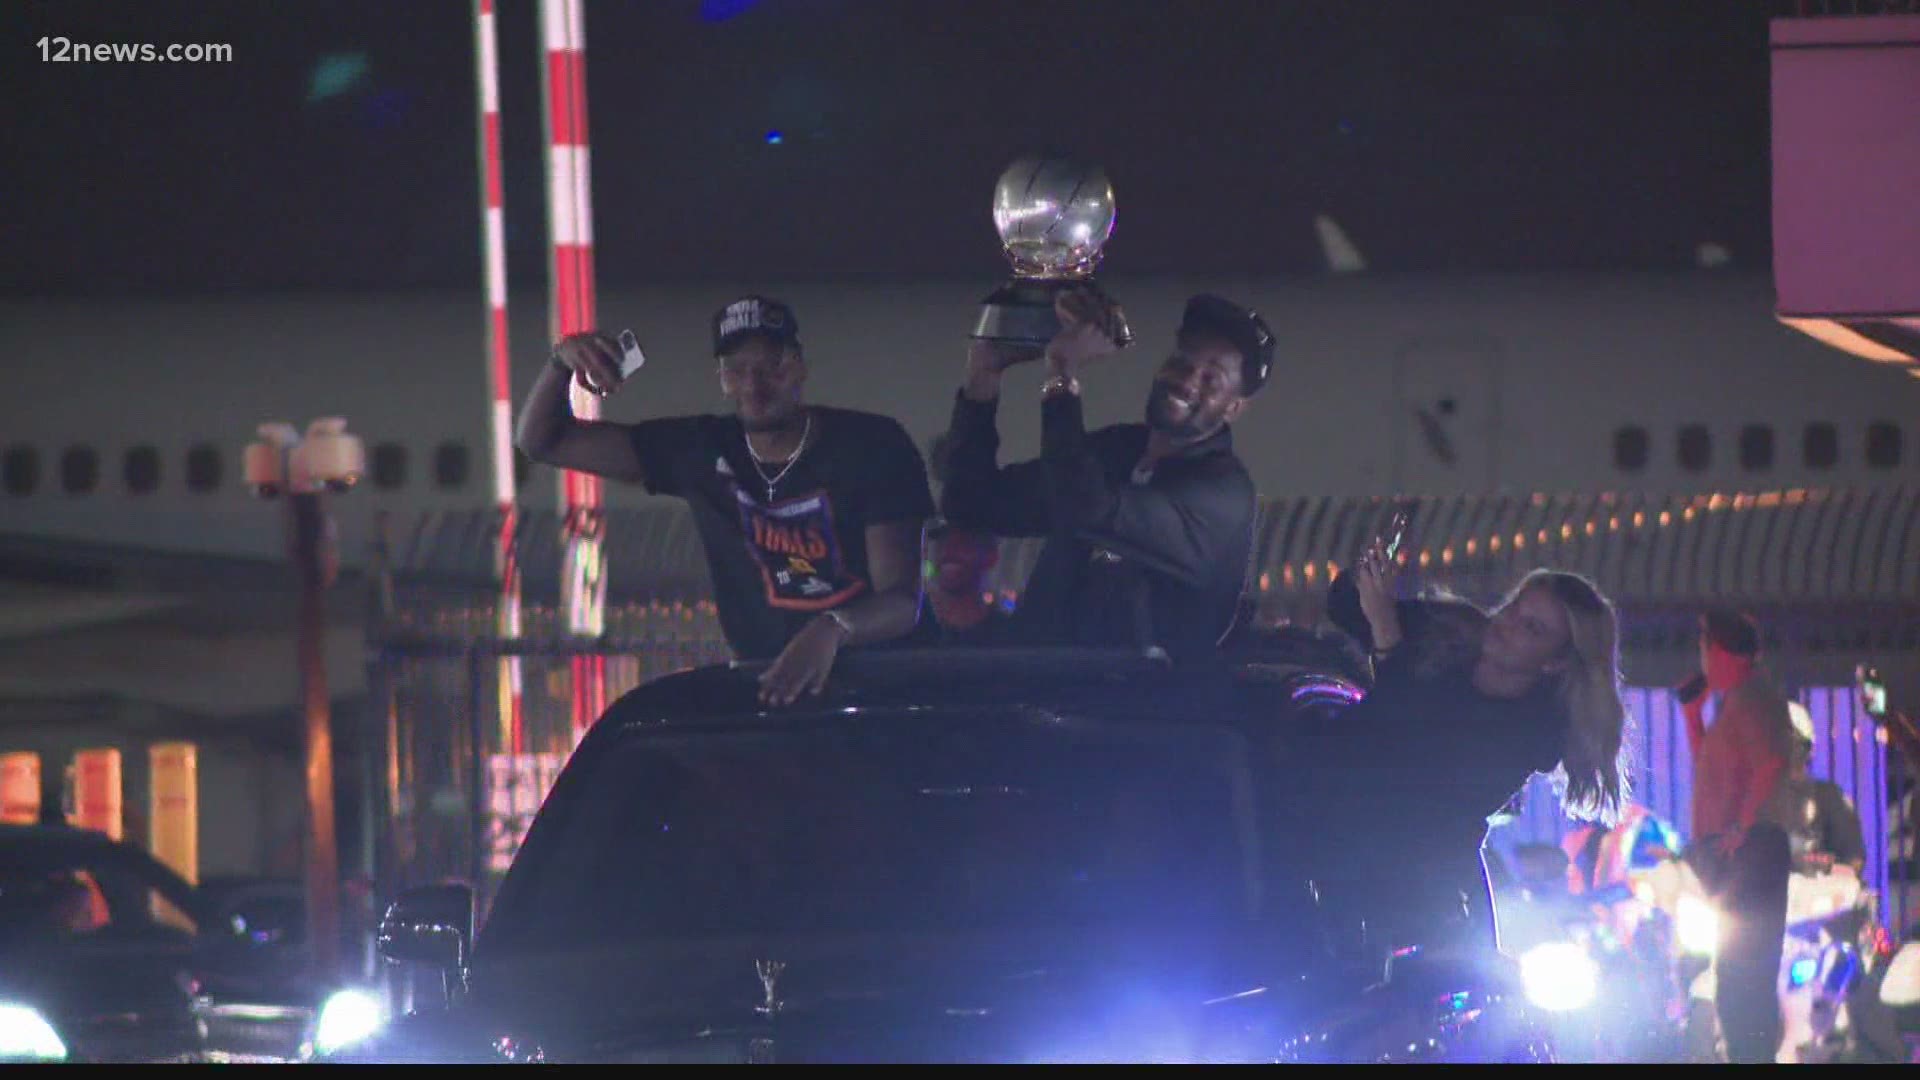 After the Phoenix Suns defeated the Los Angeles Clippers in Game 6, fans flocked to the airport to welcome the team home. Lina Washington has the story.